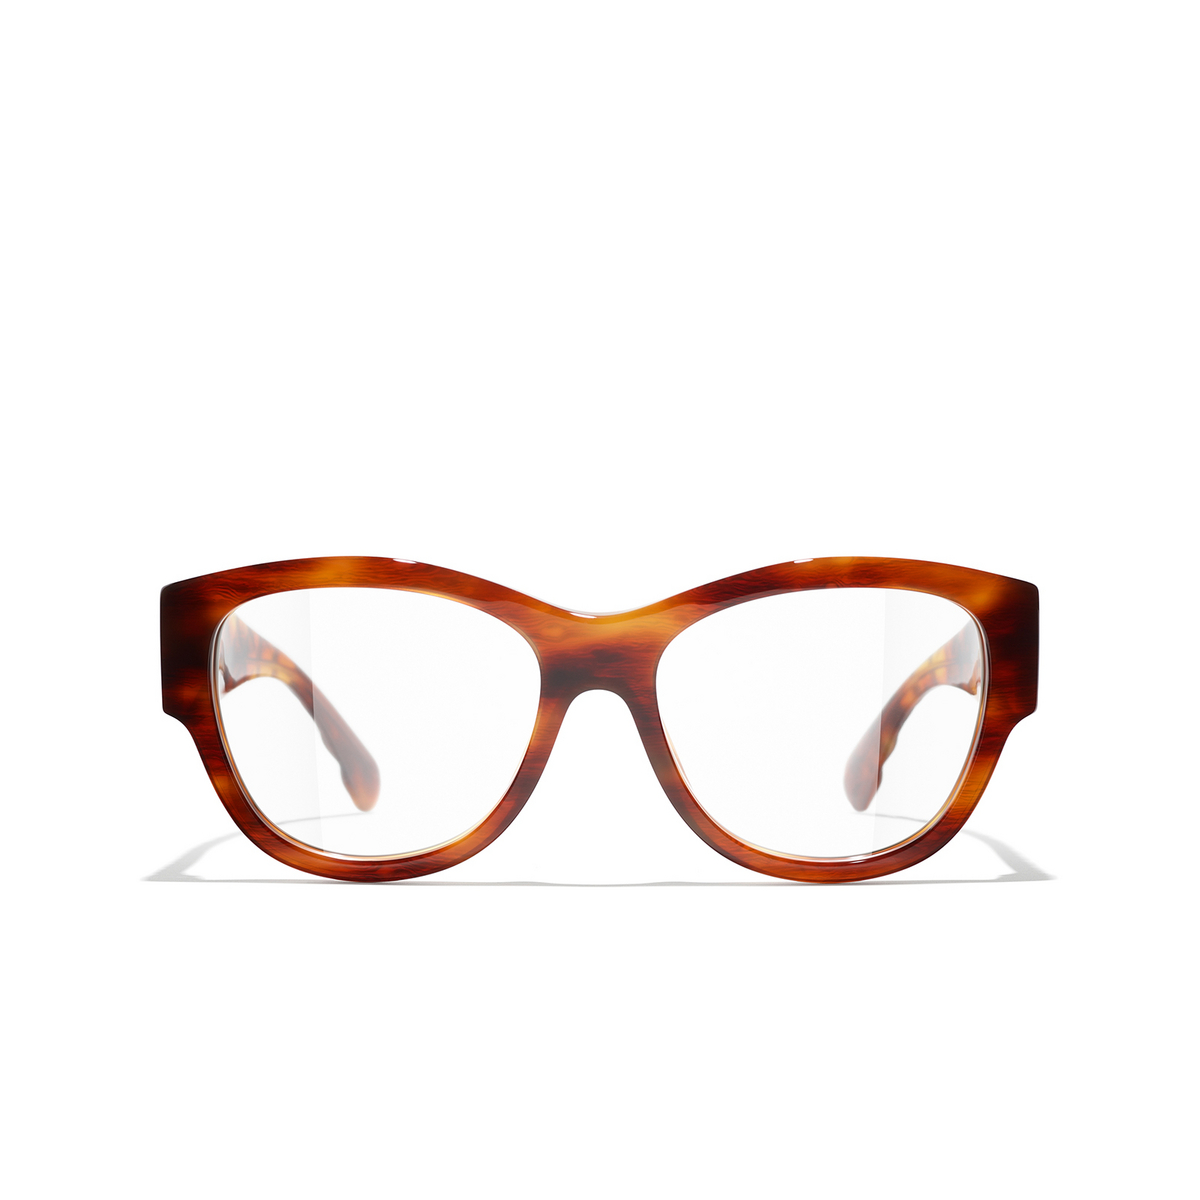 CHANEL square Eyeglasses 1077 Tortoise & Gold - front view